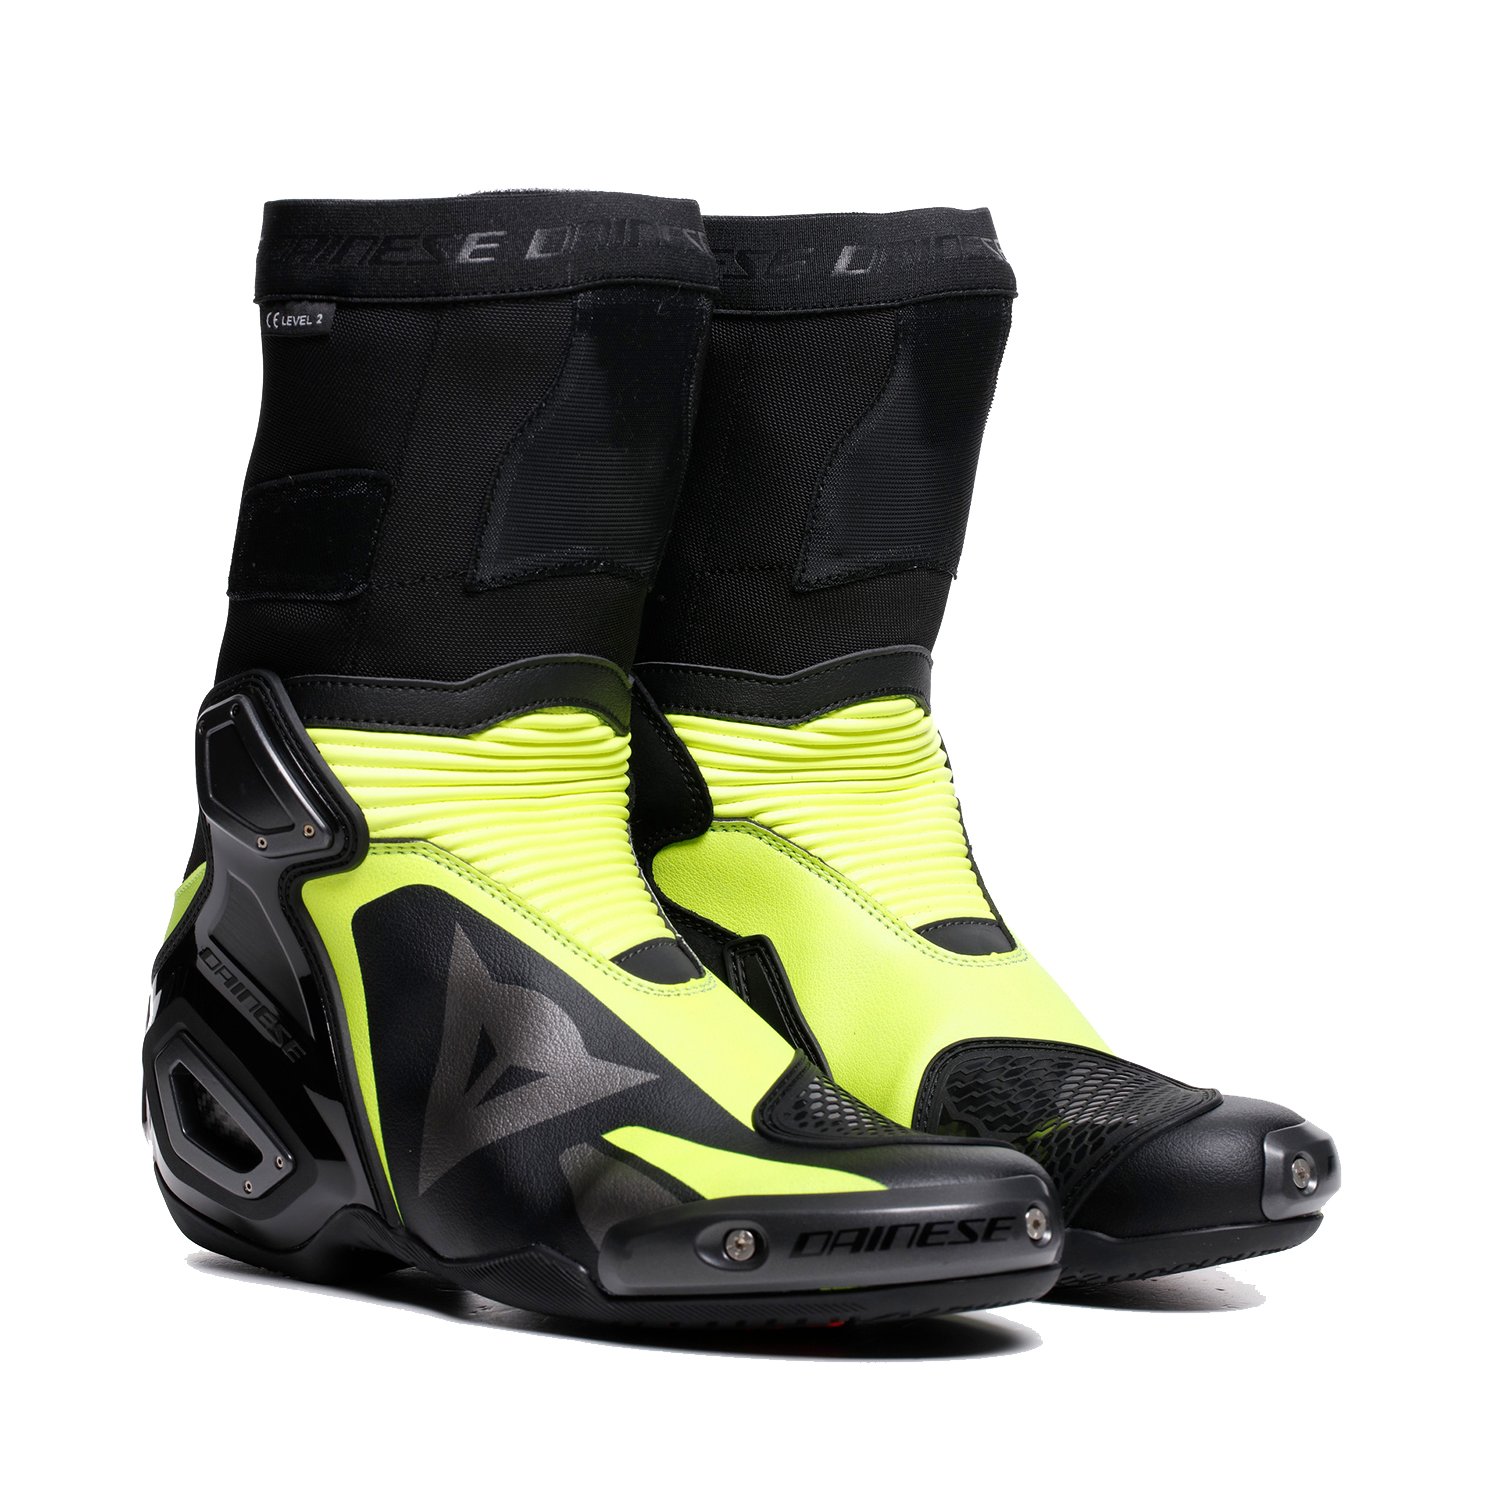 Image of Dainese Axial 2 Boots Black Yellow Fluo Größe 45